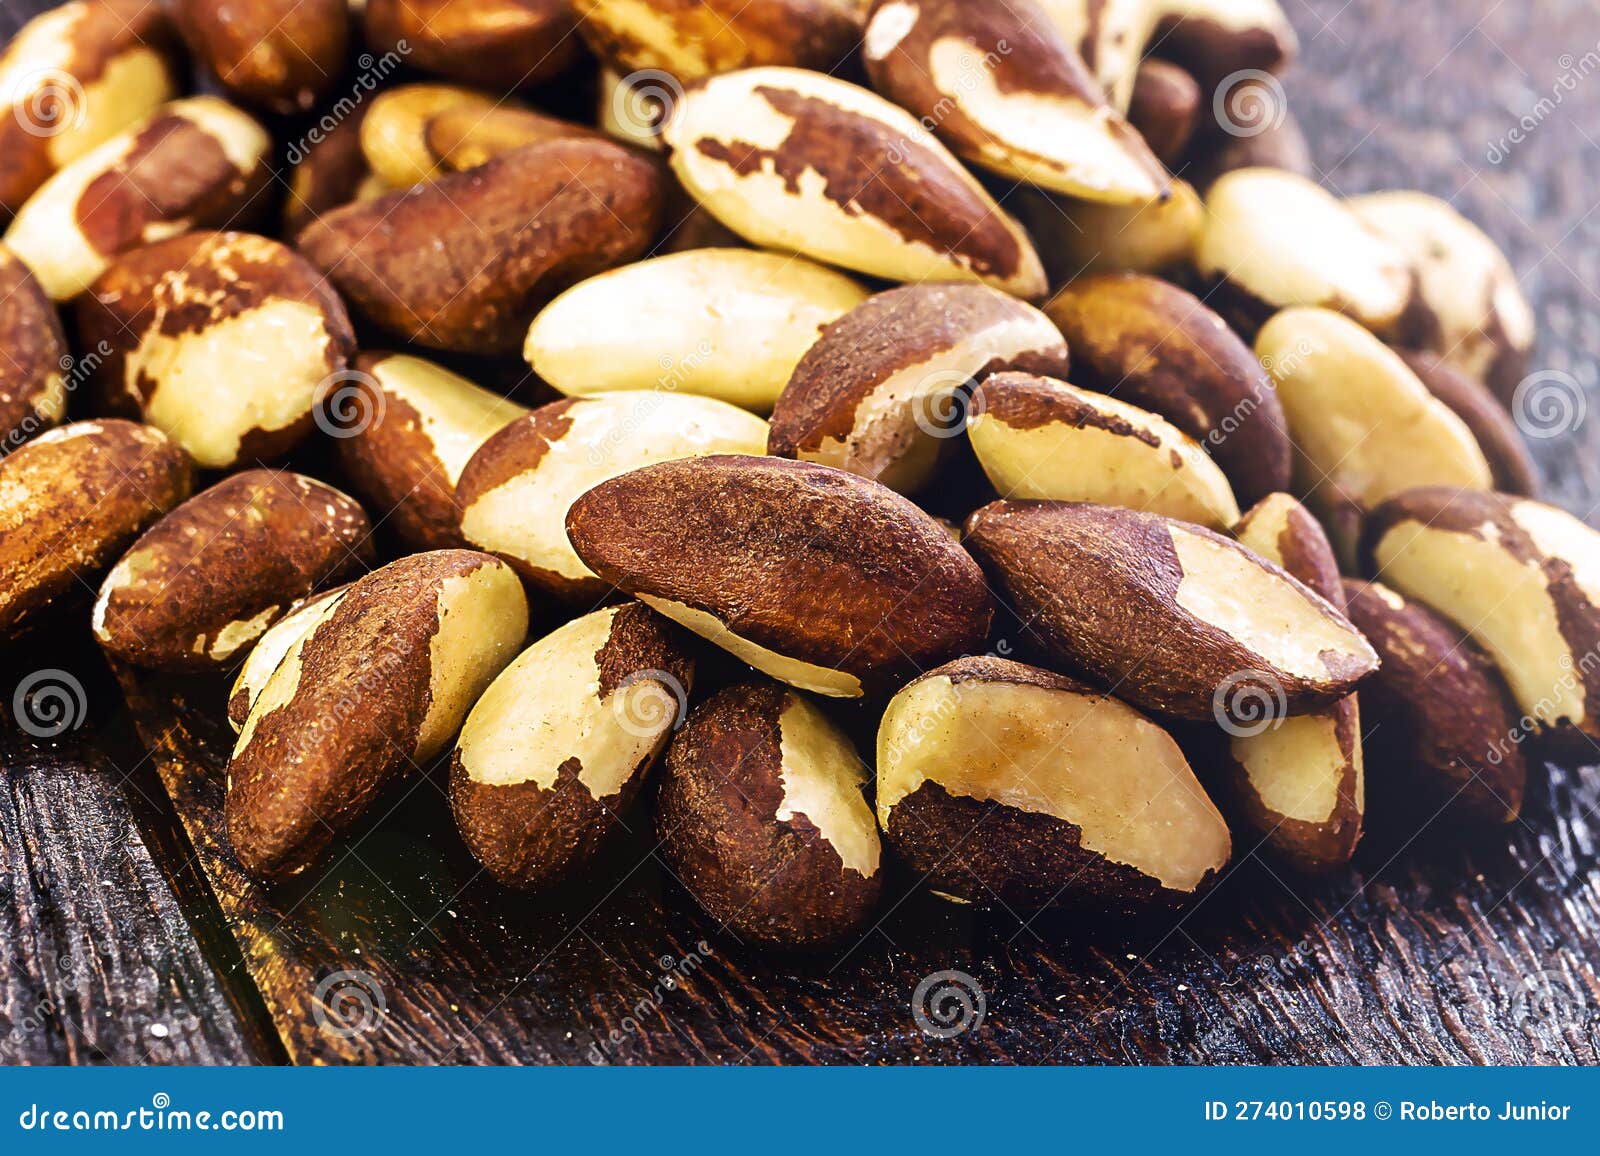 brazilian chestnut, grown in the amazon and acre, known in brazil as 